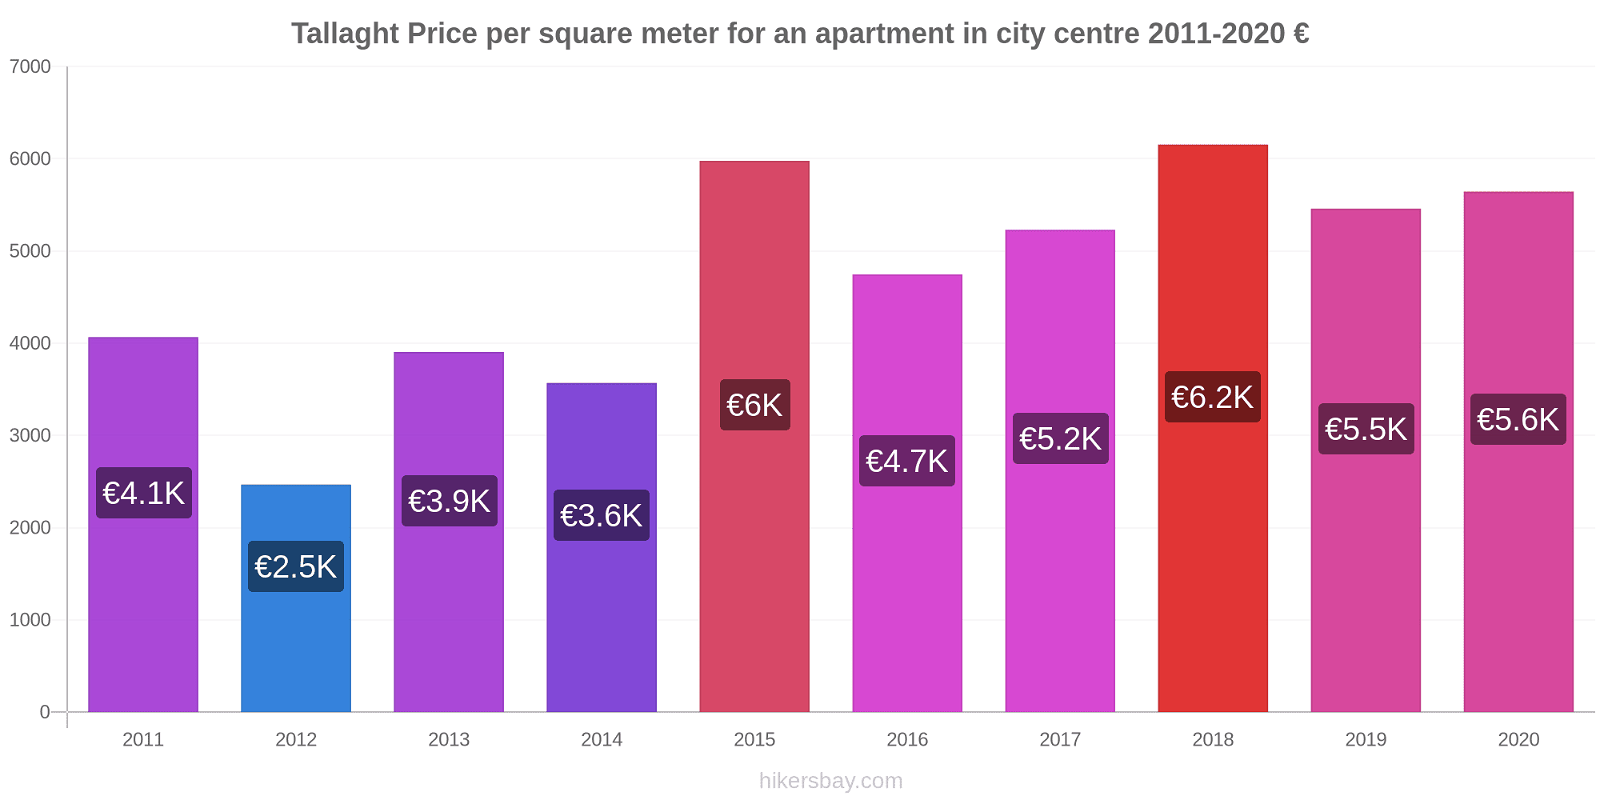 Tallaght price changes Price per square meter for an apartment in city centre hikersbay.com